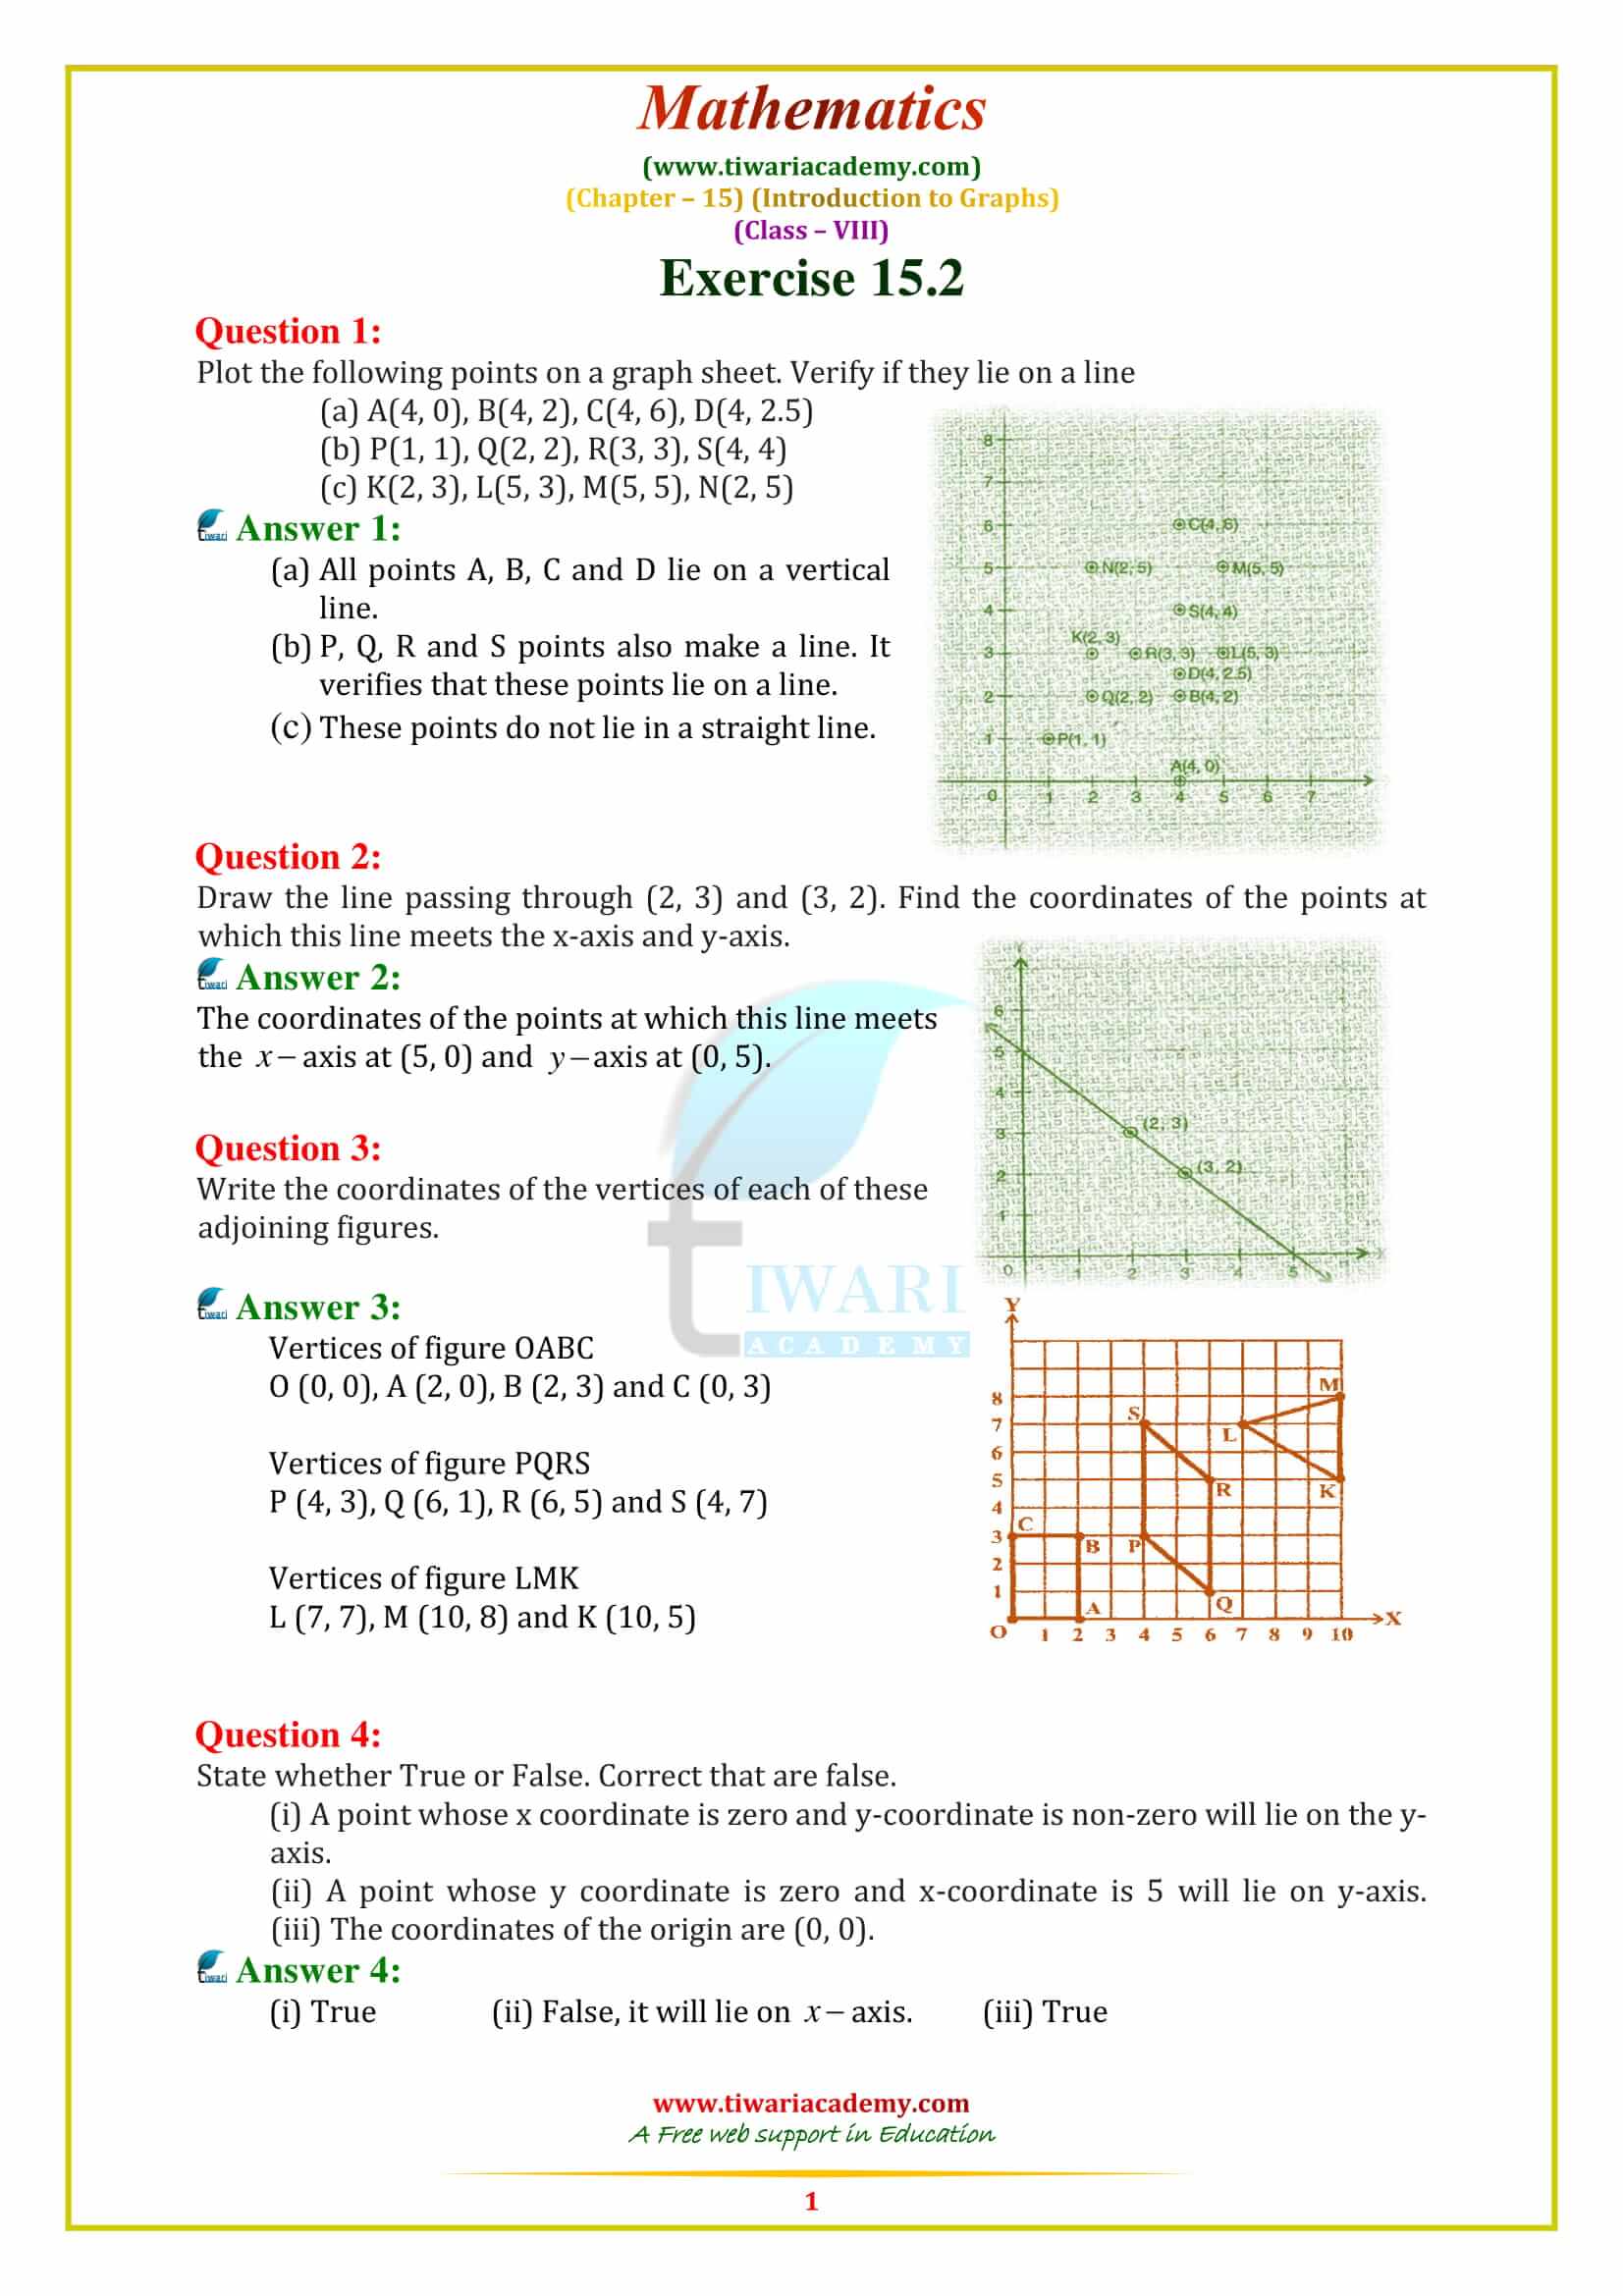 NCERT Solutions for Class 8 Maths Chapter 15 Exercise 15.2 in pdf